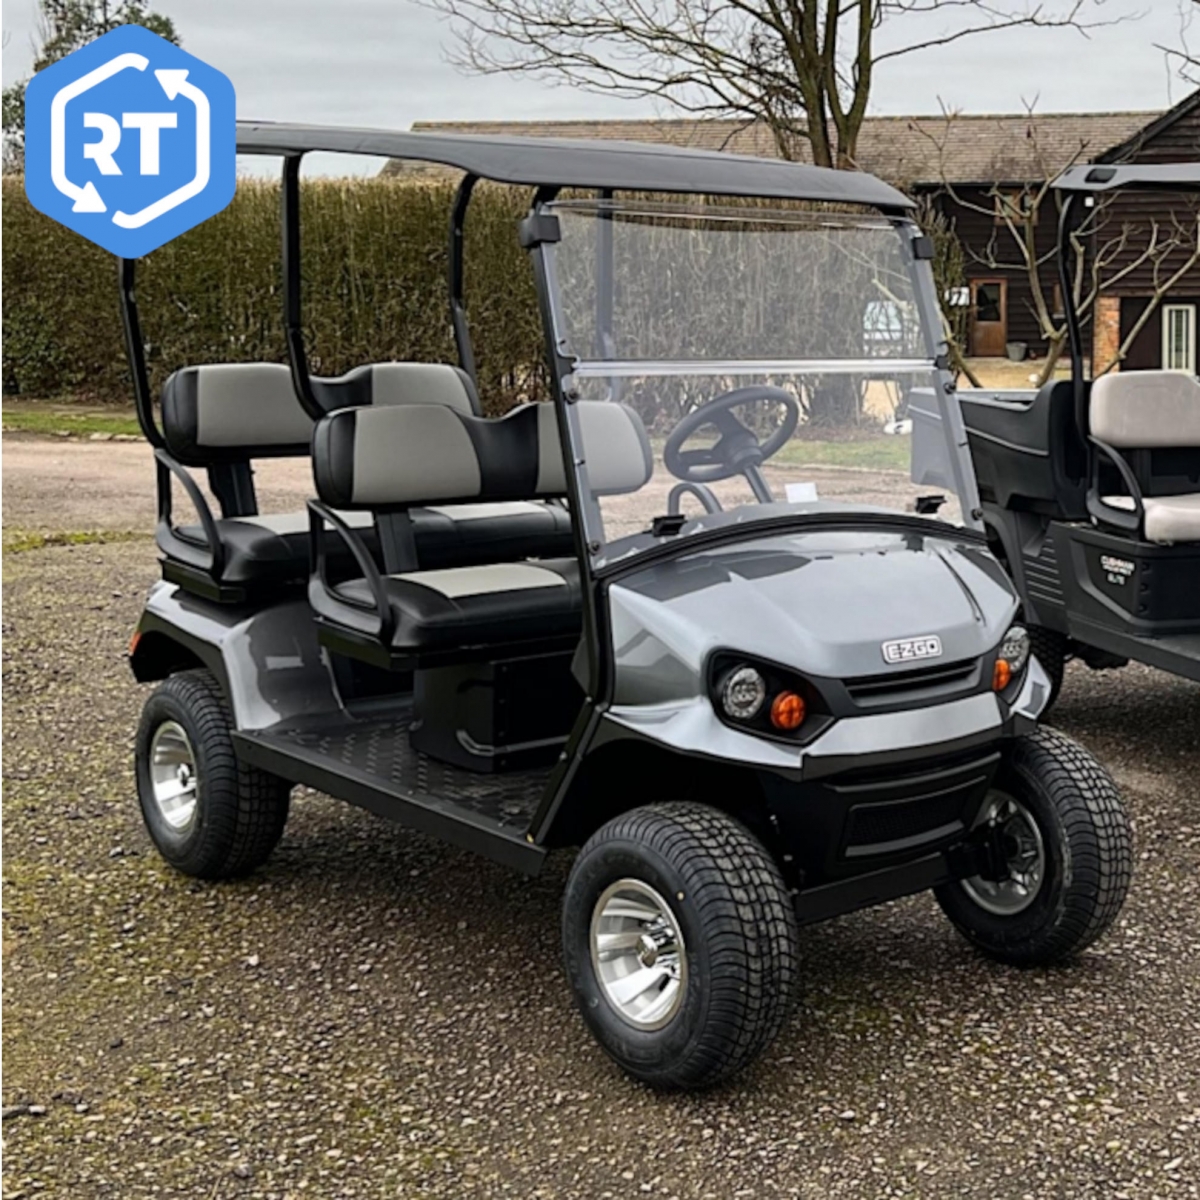 Used E-Z-GO Liberty Links Battery-powered Golf Cart + Personnel Carrier